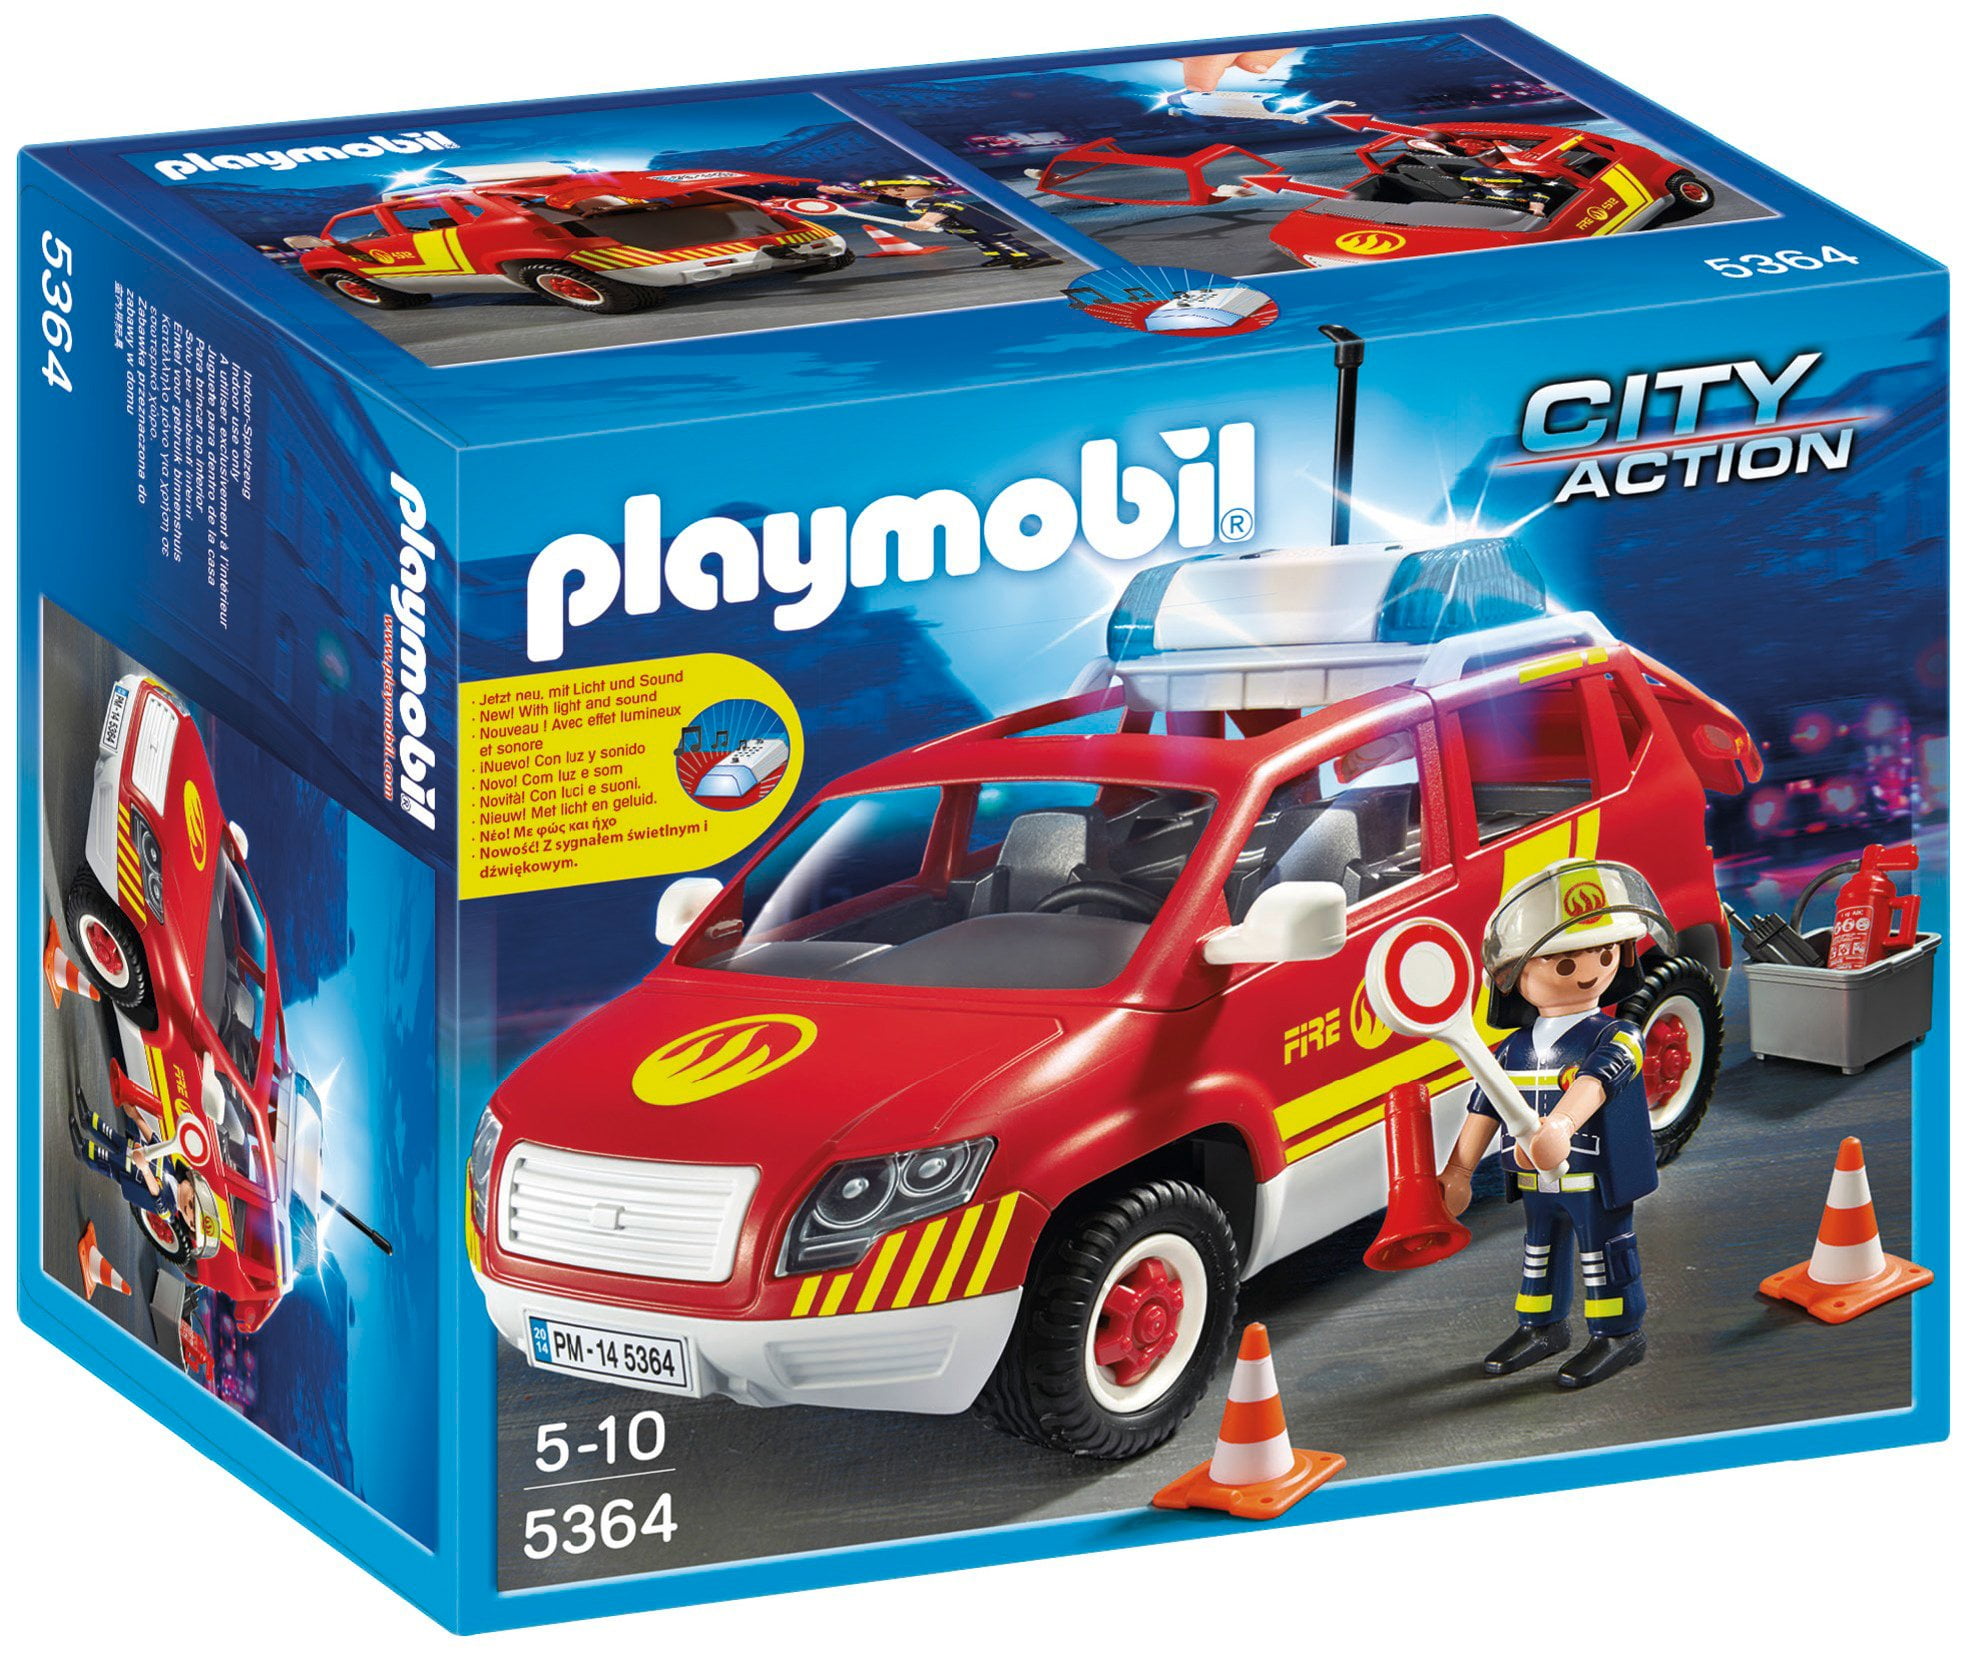 City Action Fire Chief's Car with Lights and Sound Set Playmobil 5364 